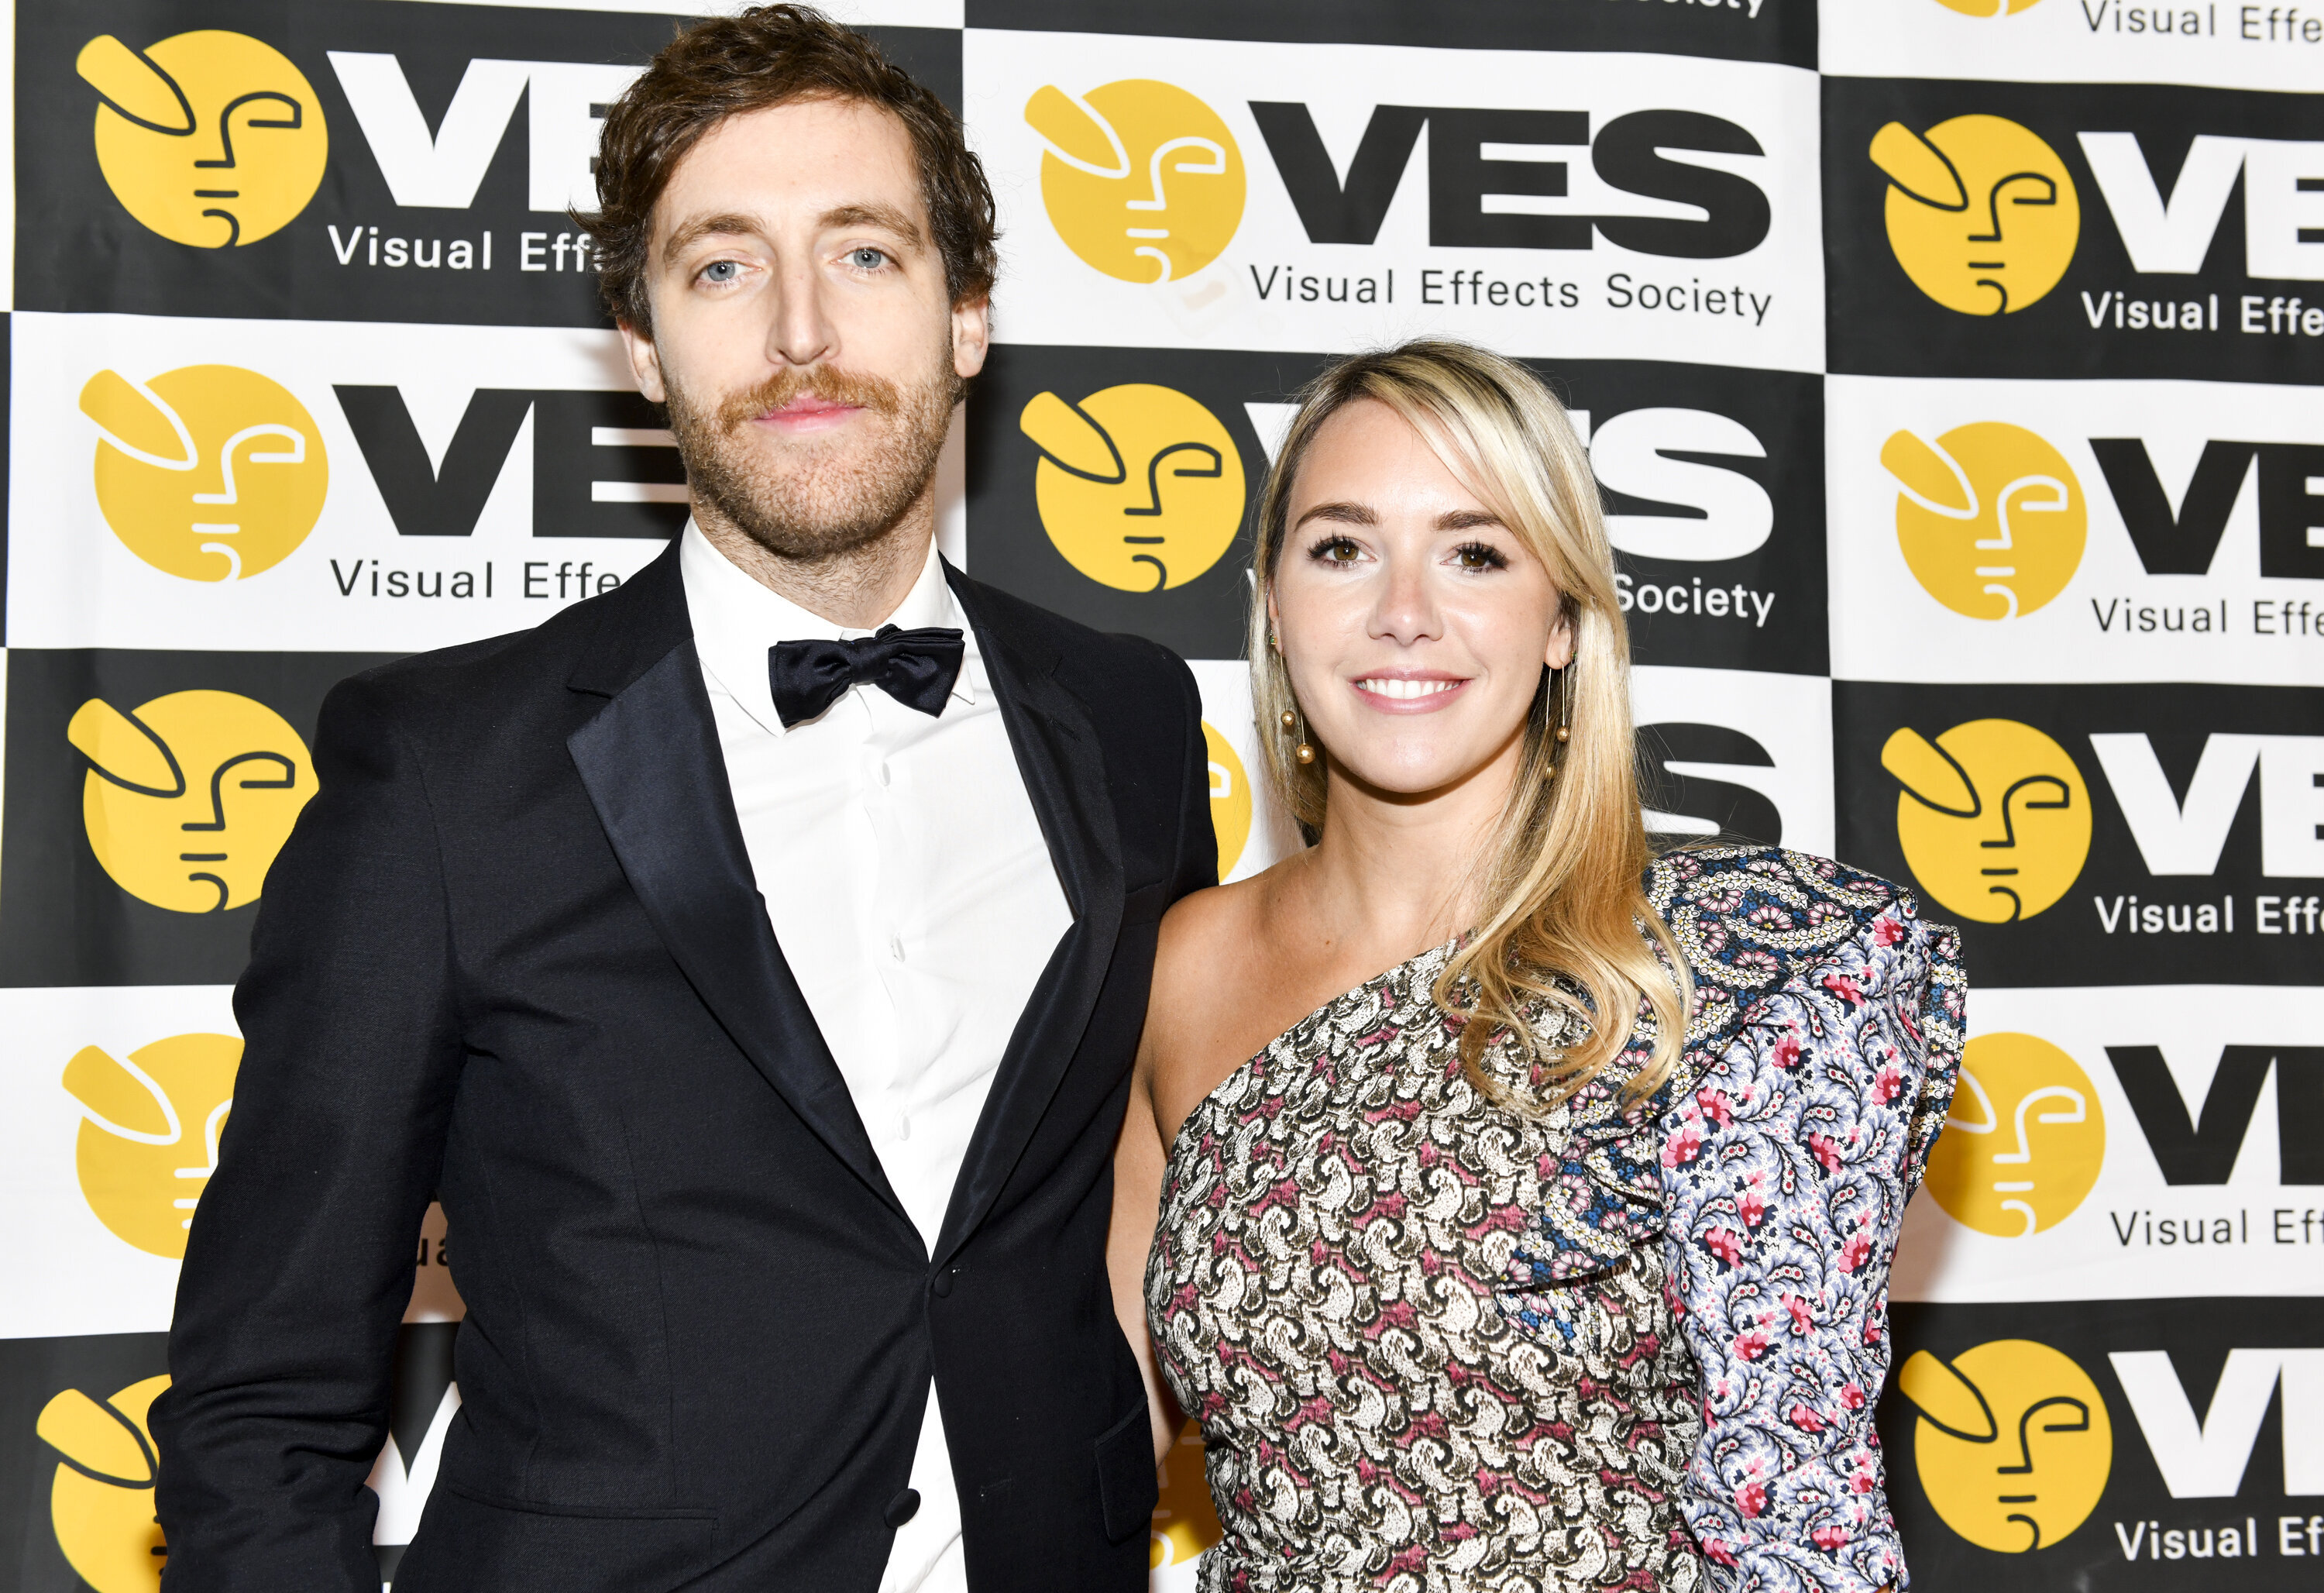 Silicon Valley Star Thomas Middleditch Says Swinging Has Saved Our Marriage HuffPost Entertainment photo